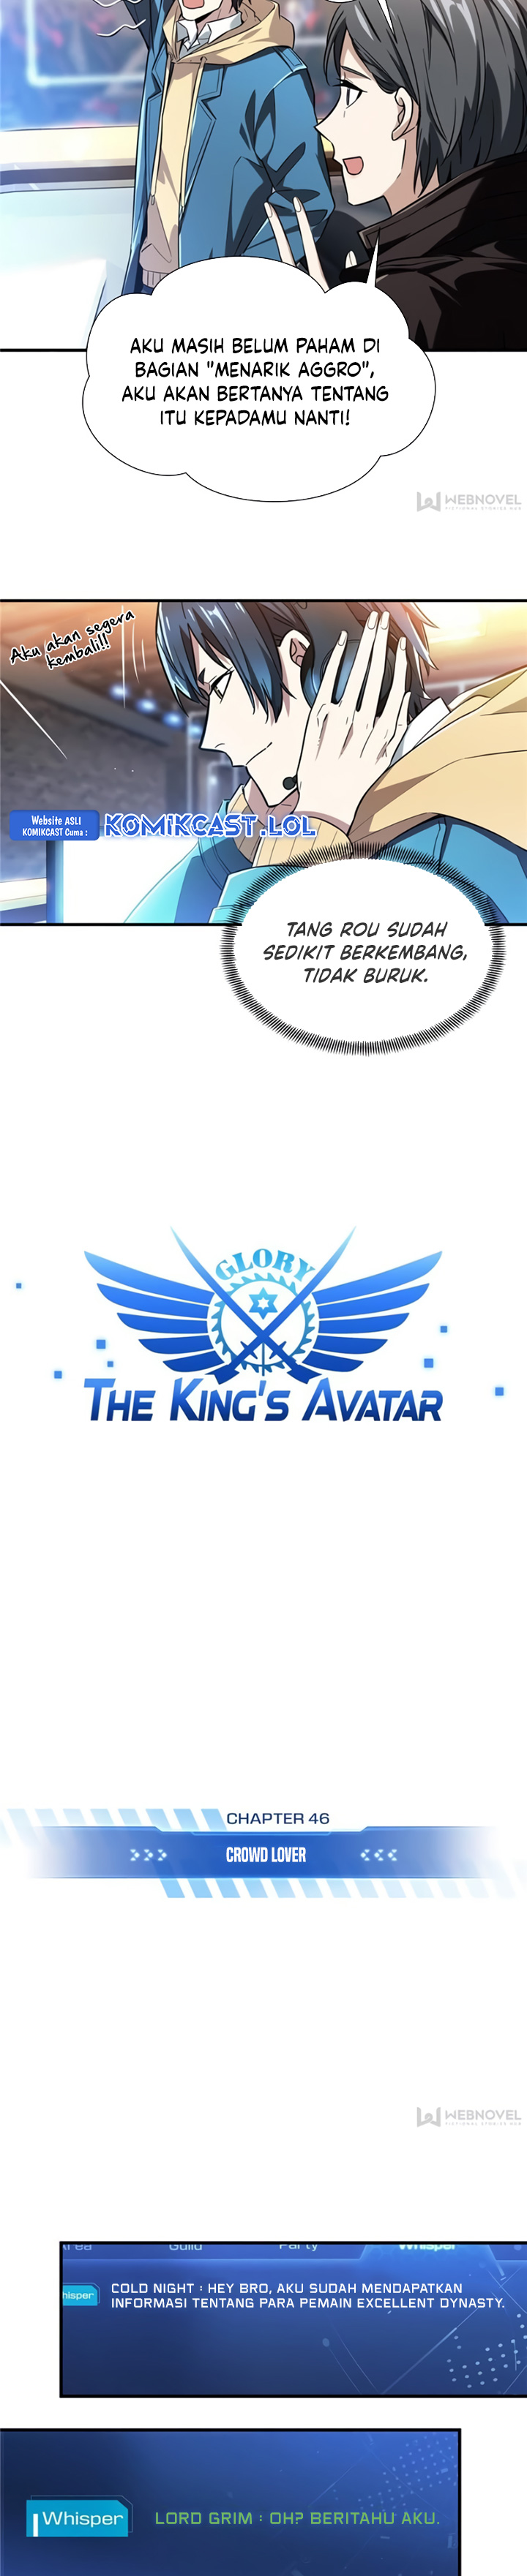 The King’s Avatar (2020) Chapter 46